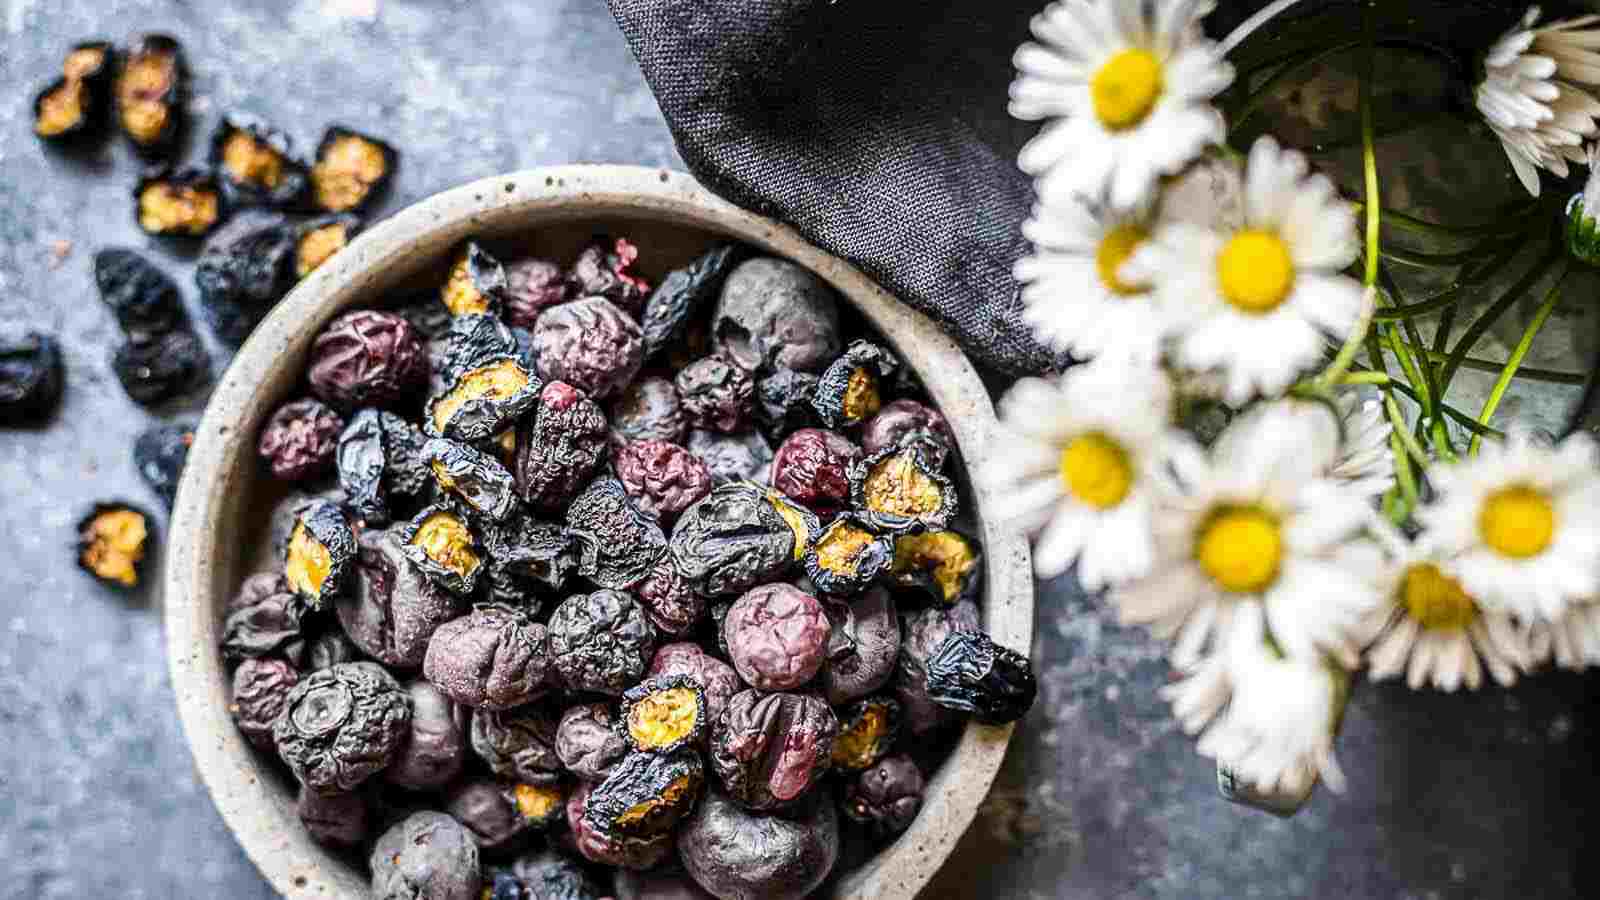 Dried blueberries in a bowl next to daisies.